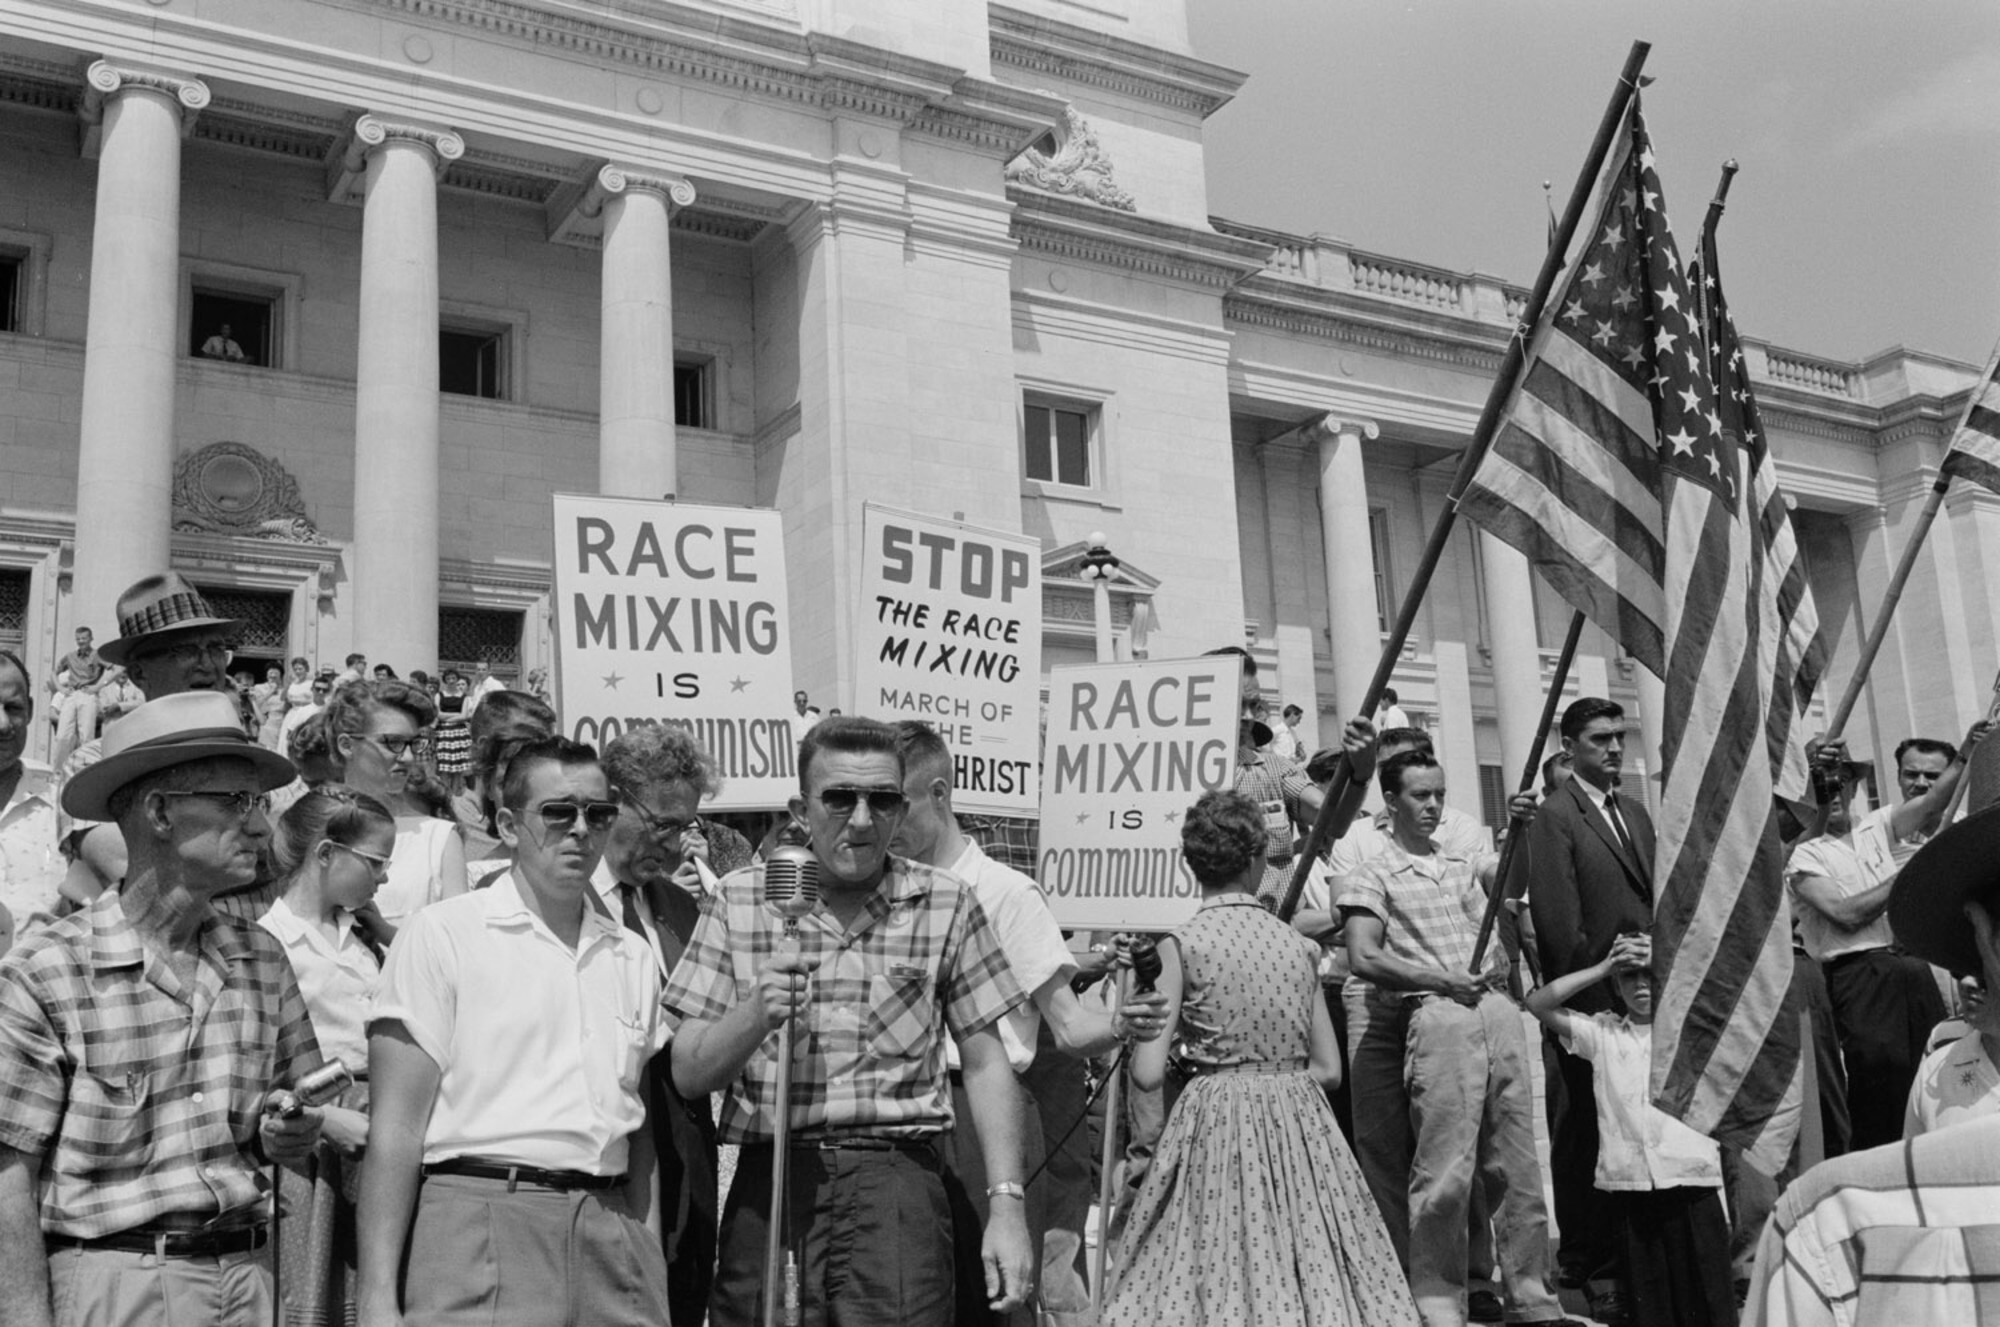 A rally against the integration of Central High School in n Little Rock, Arkansas, 1959.